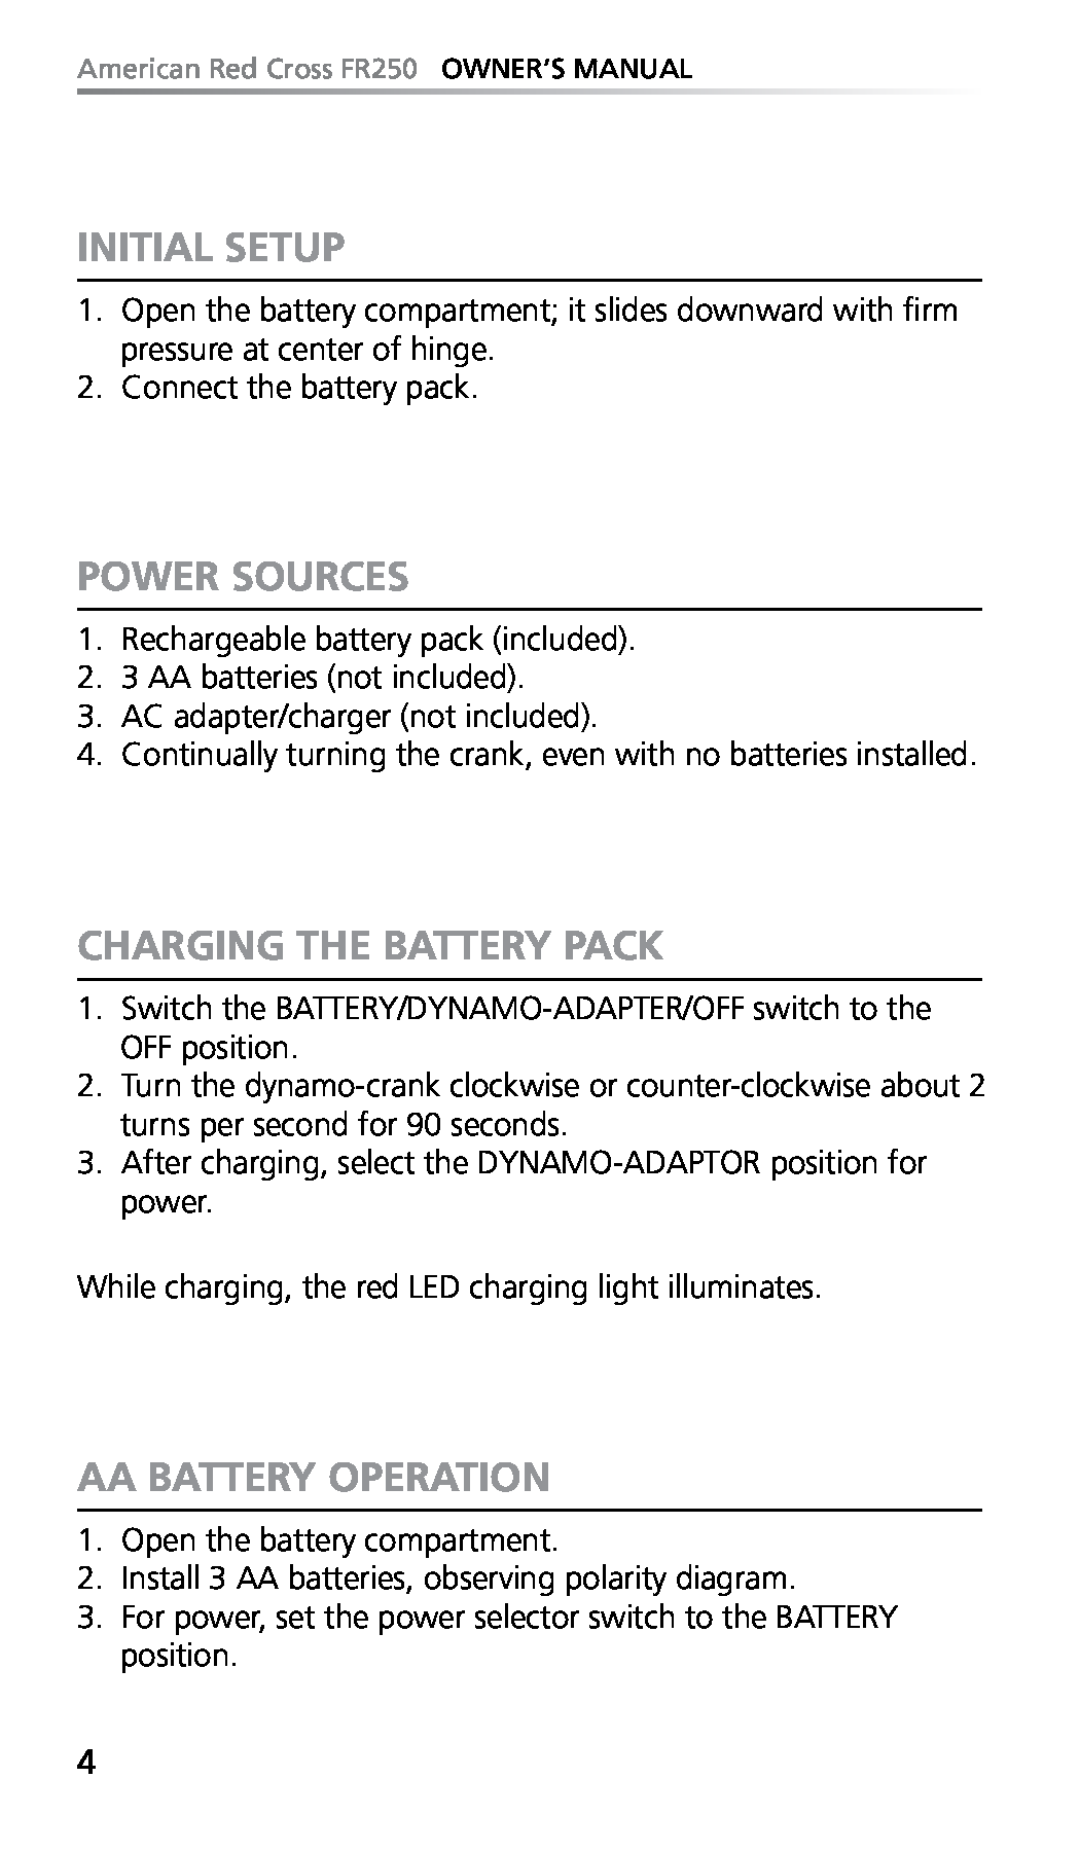 Eton FR250 owner manual Initial Setup, Power Sources, Charging The Battery Pack, Aa Battery Operation 